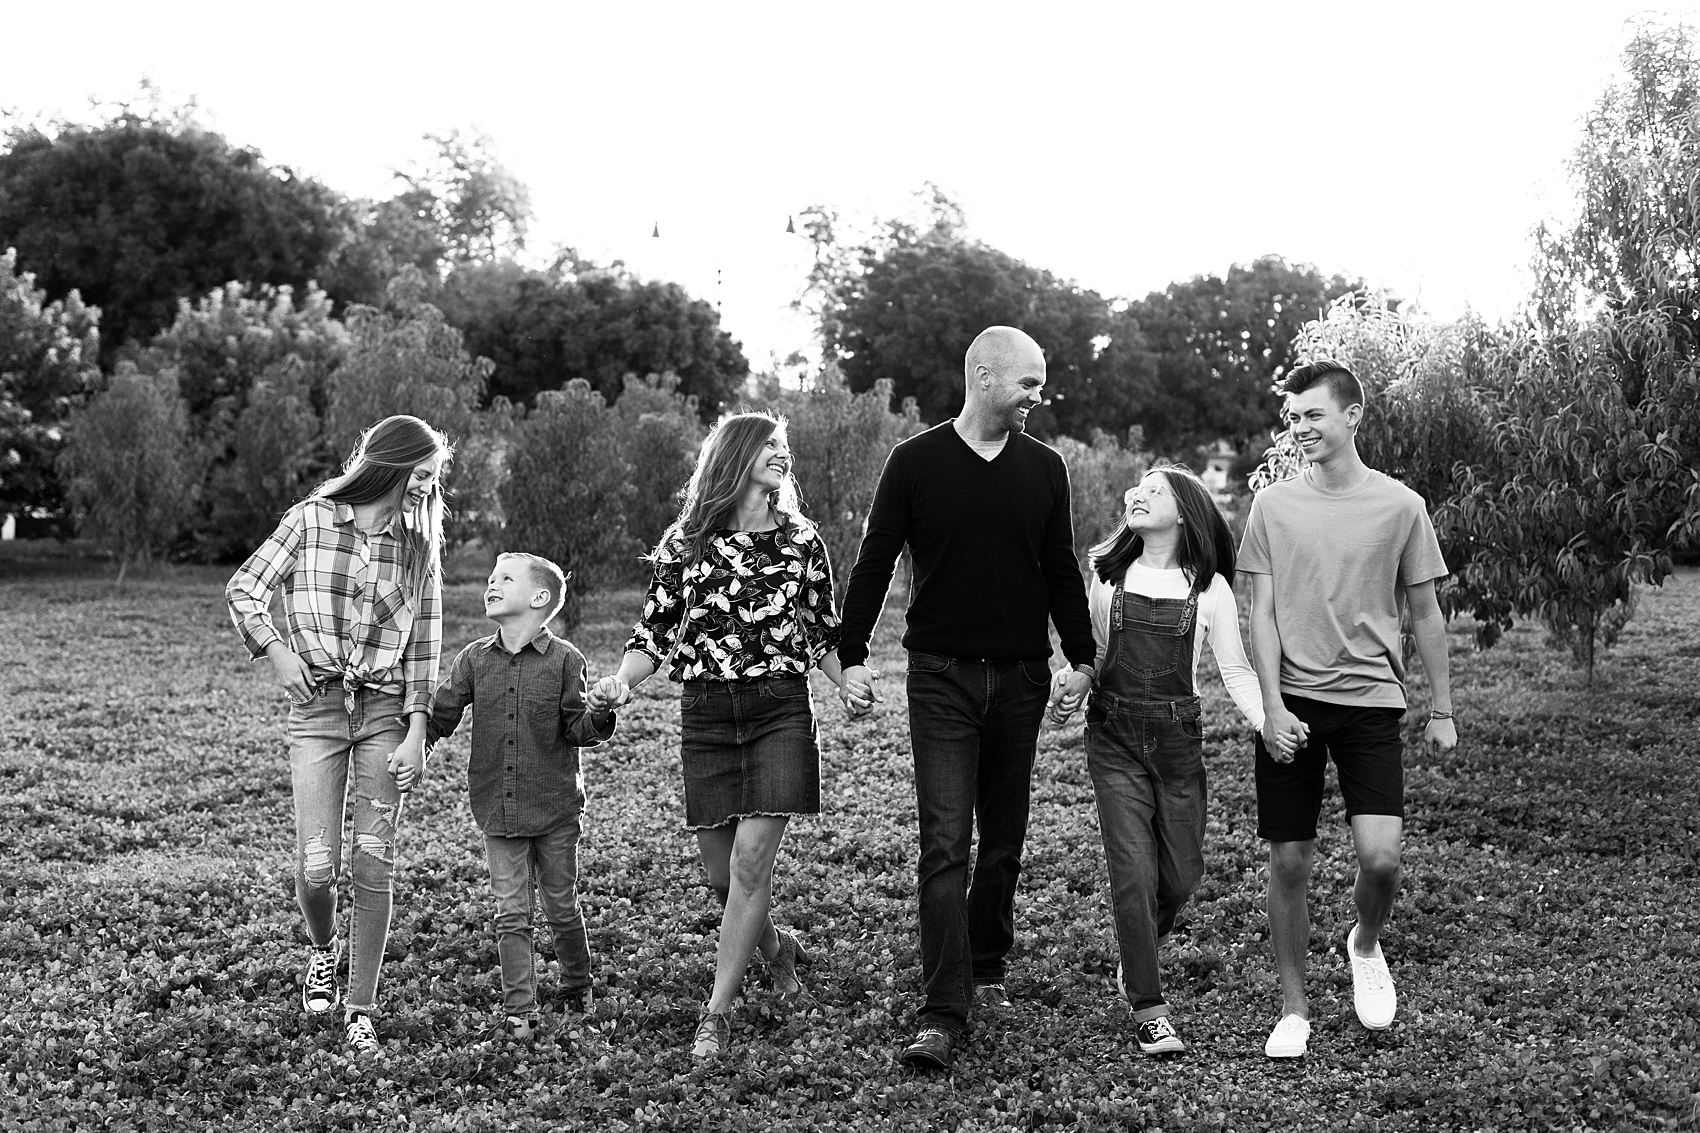 Leah Hope Photography | Phoenix Gilbert Arizona | Agritopia Green Orange Tree Orchard | Family Pictures | What to Wear | Family Photos Poses